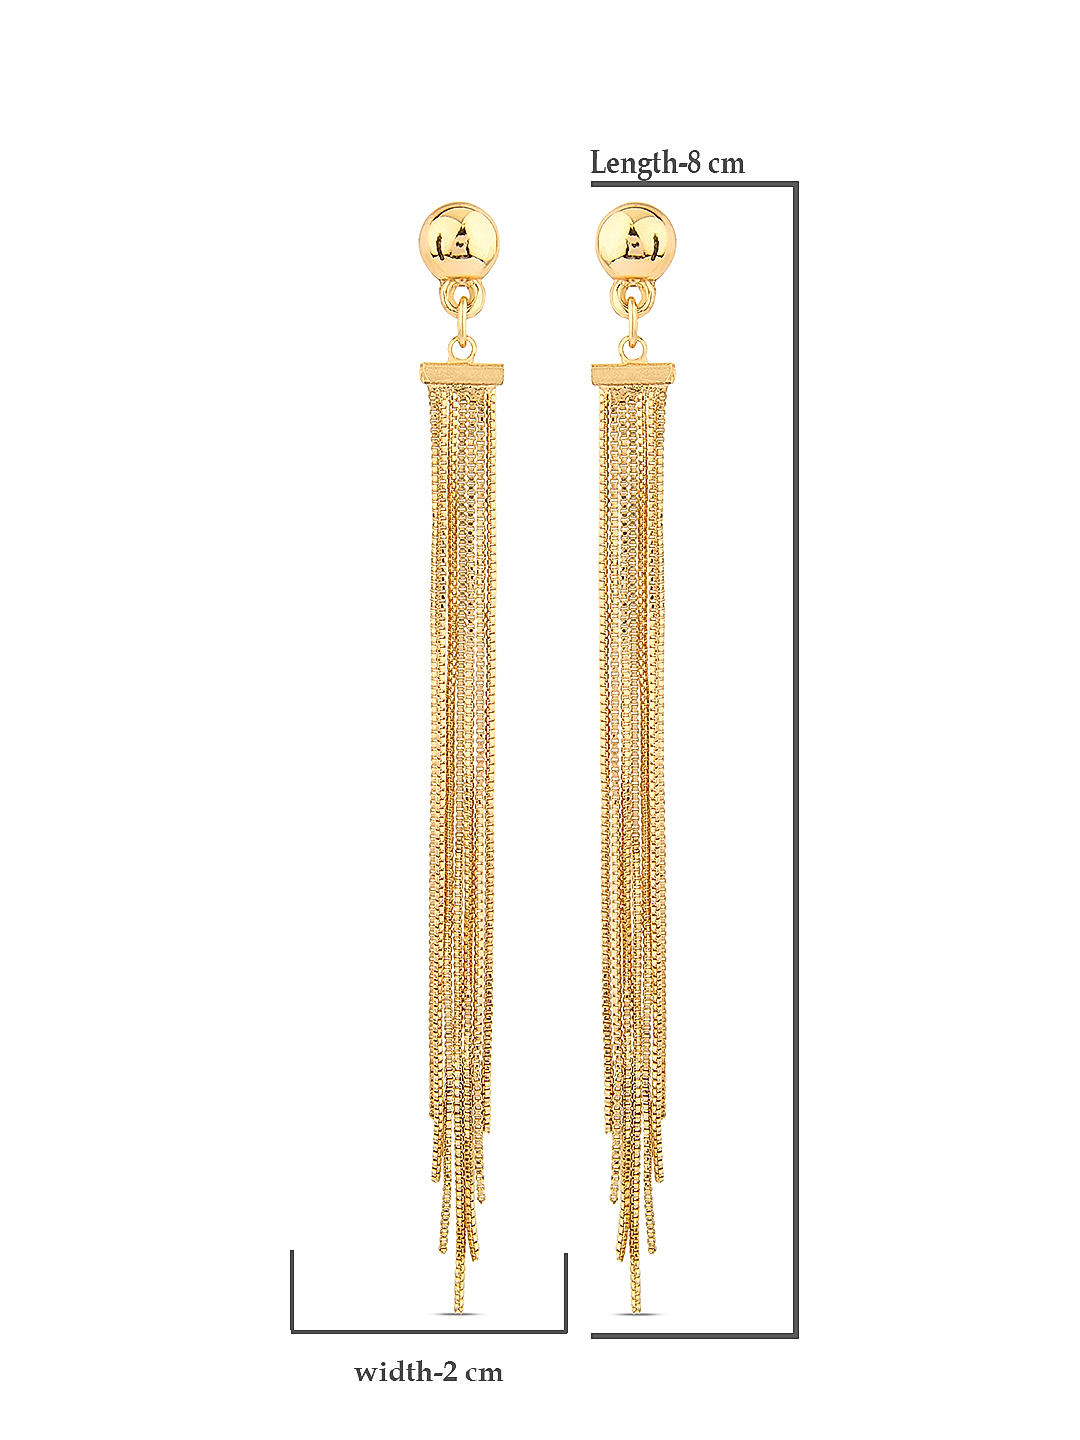 Floral Pearl Long Chain Drop Earrings | B165-Avons22-9 | Cilory.com